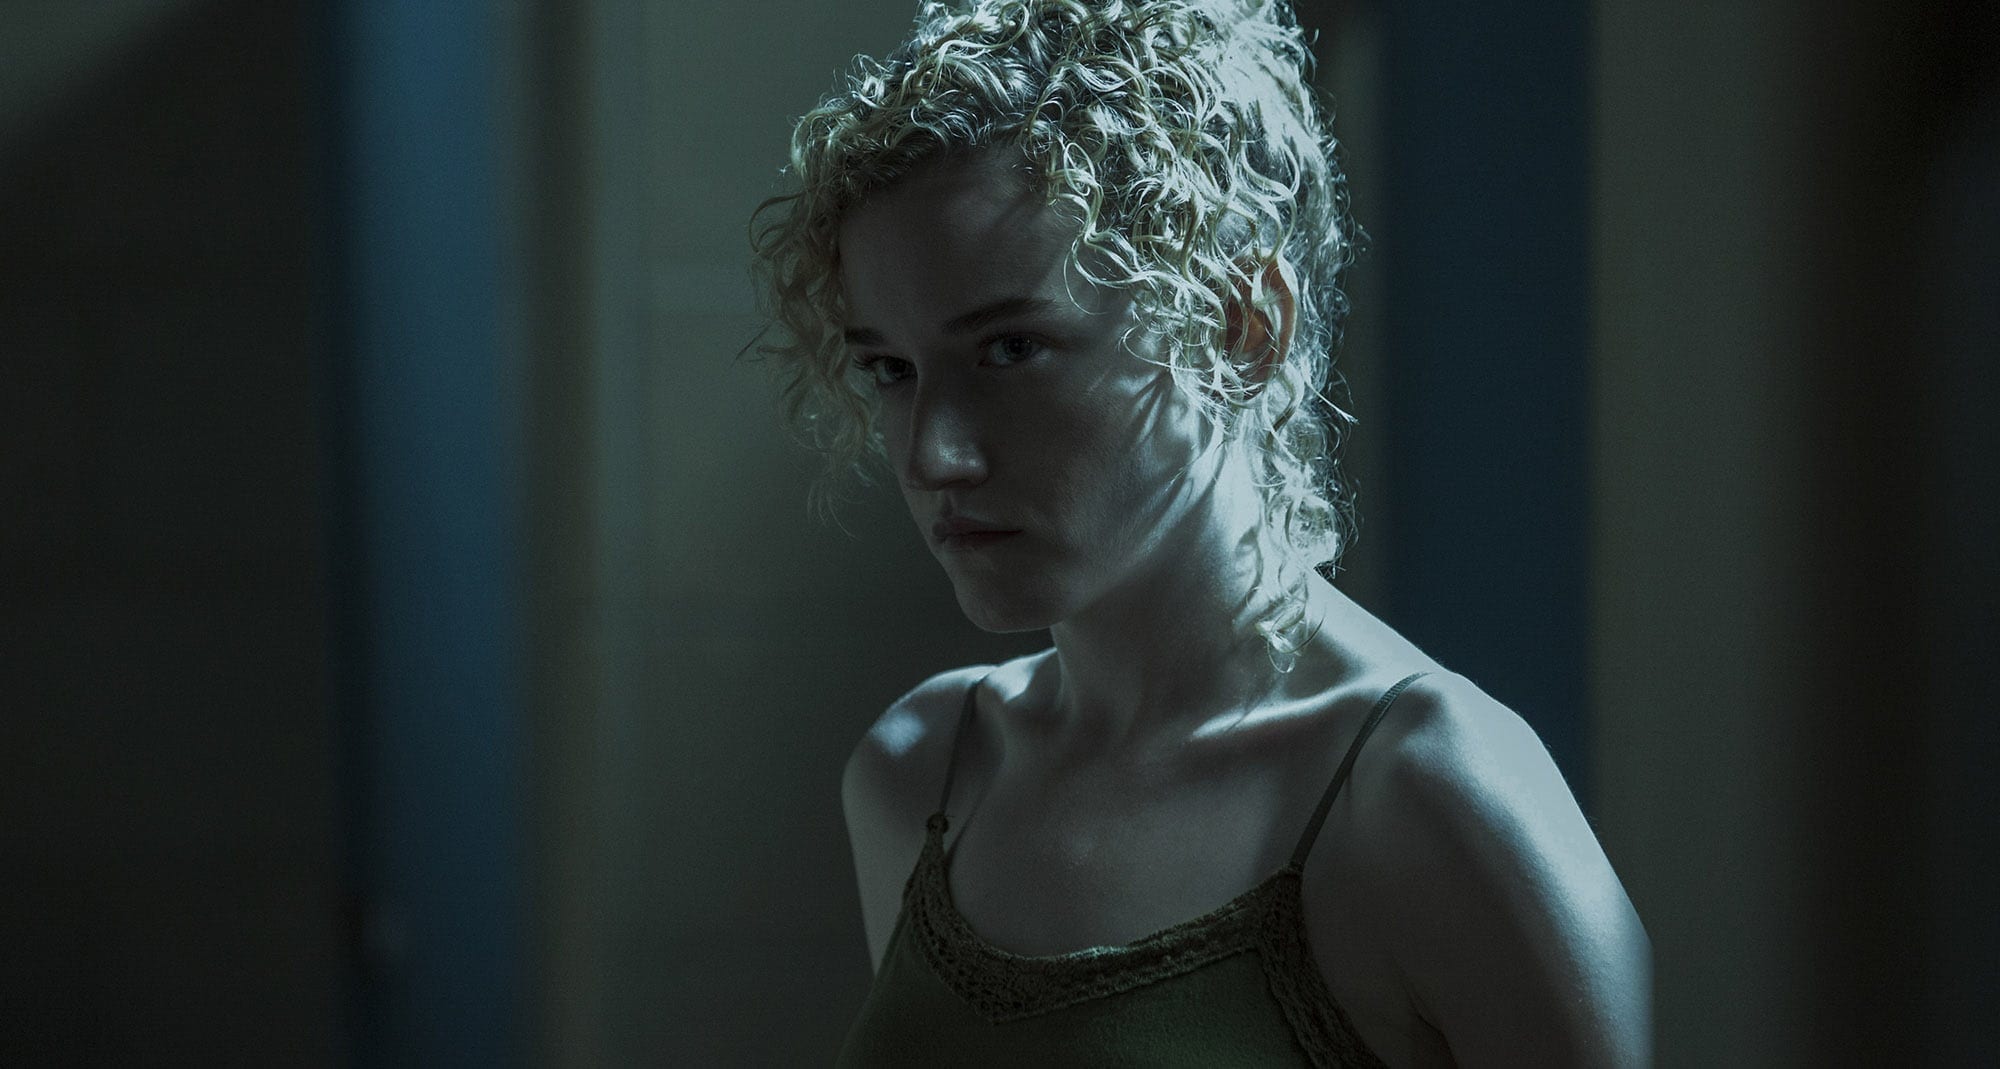 You’d be forgiven for lauding Jason Bateman’s central performance in 'Ozark' as the best on the show. But while his journey into a serious role is not without its merits, we think the real shining star of Netflix’s gritty crime drama is none other than Julia Garner.